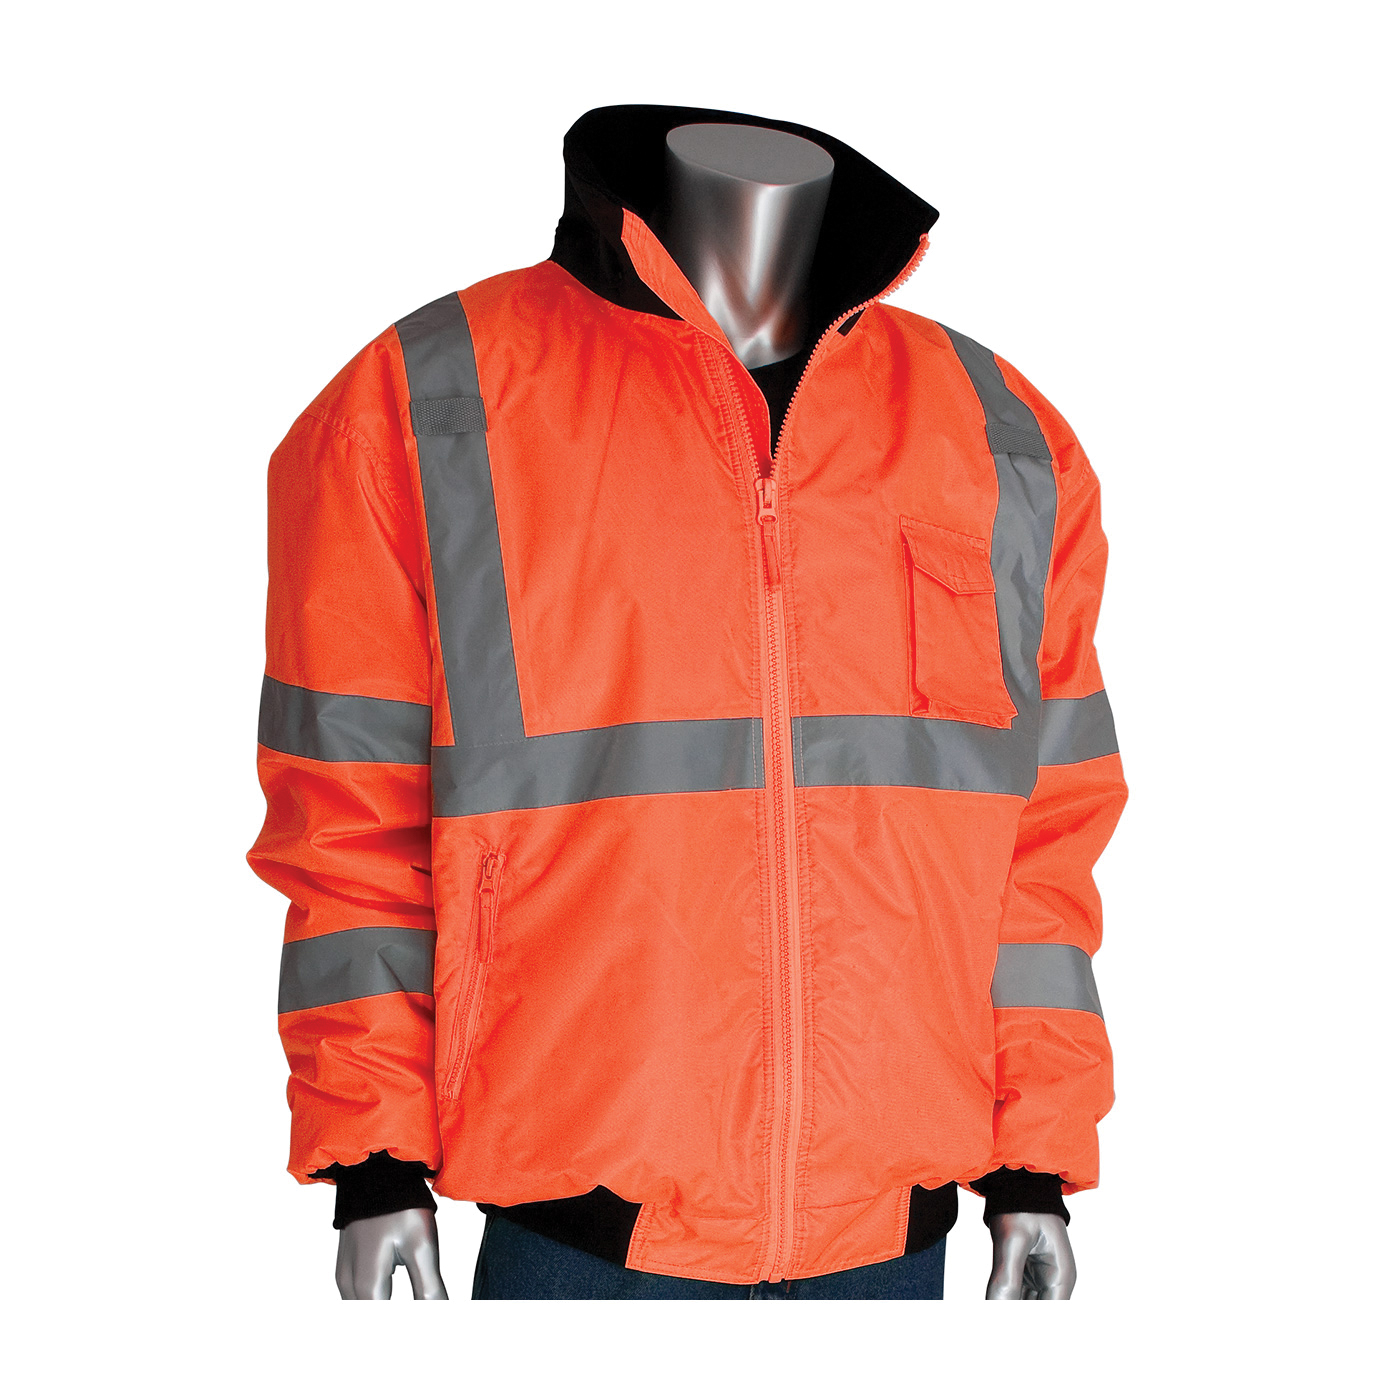 PIP® 333-1762-OR/2X Bomber Jacket With Zip-Out Fleece Liner, Hi-Viz Lime Orange, Polyester, 63 in Chest, Resists: Water, Specifications Met: ANSI 107 Class 3 Type R